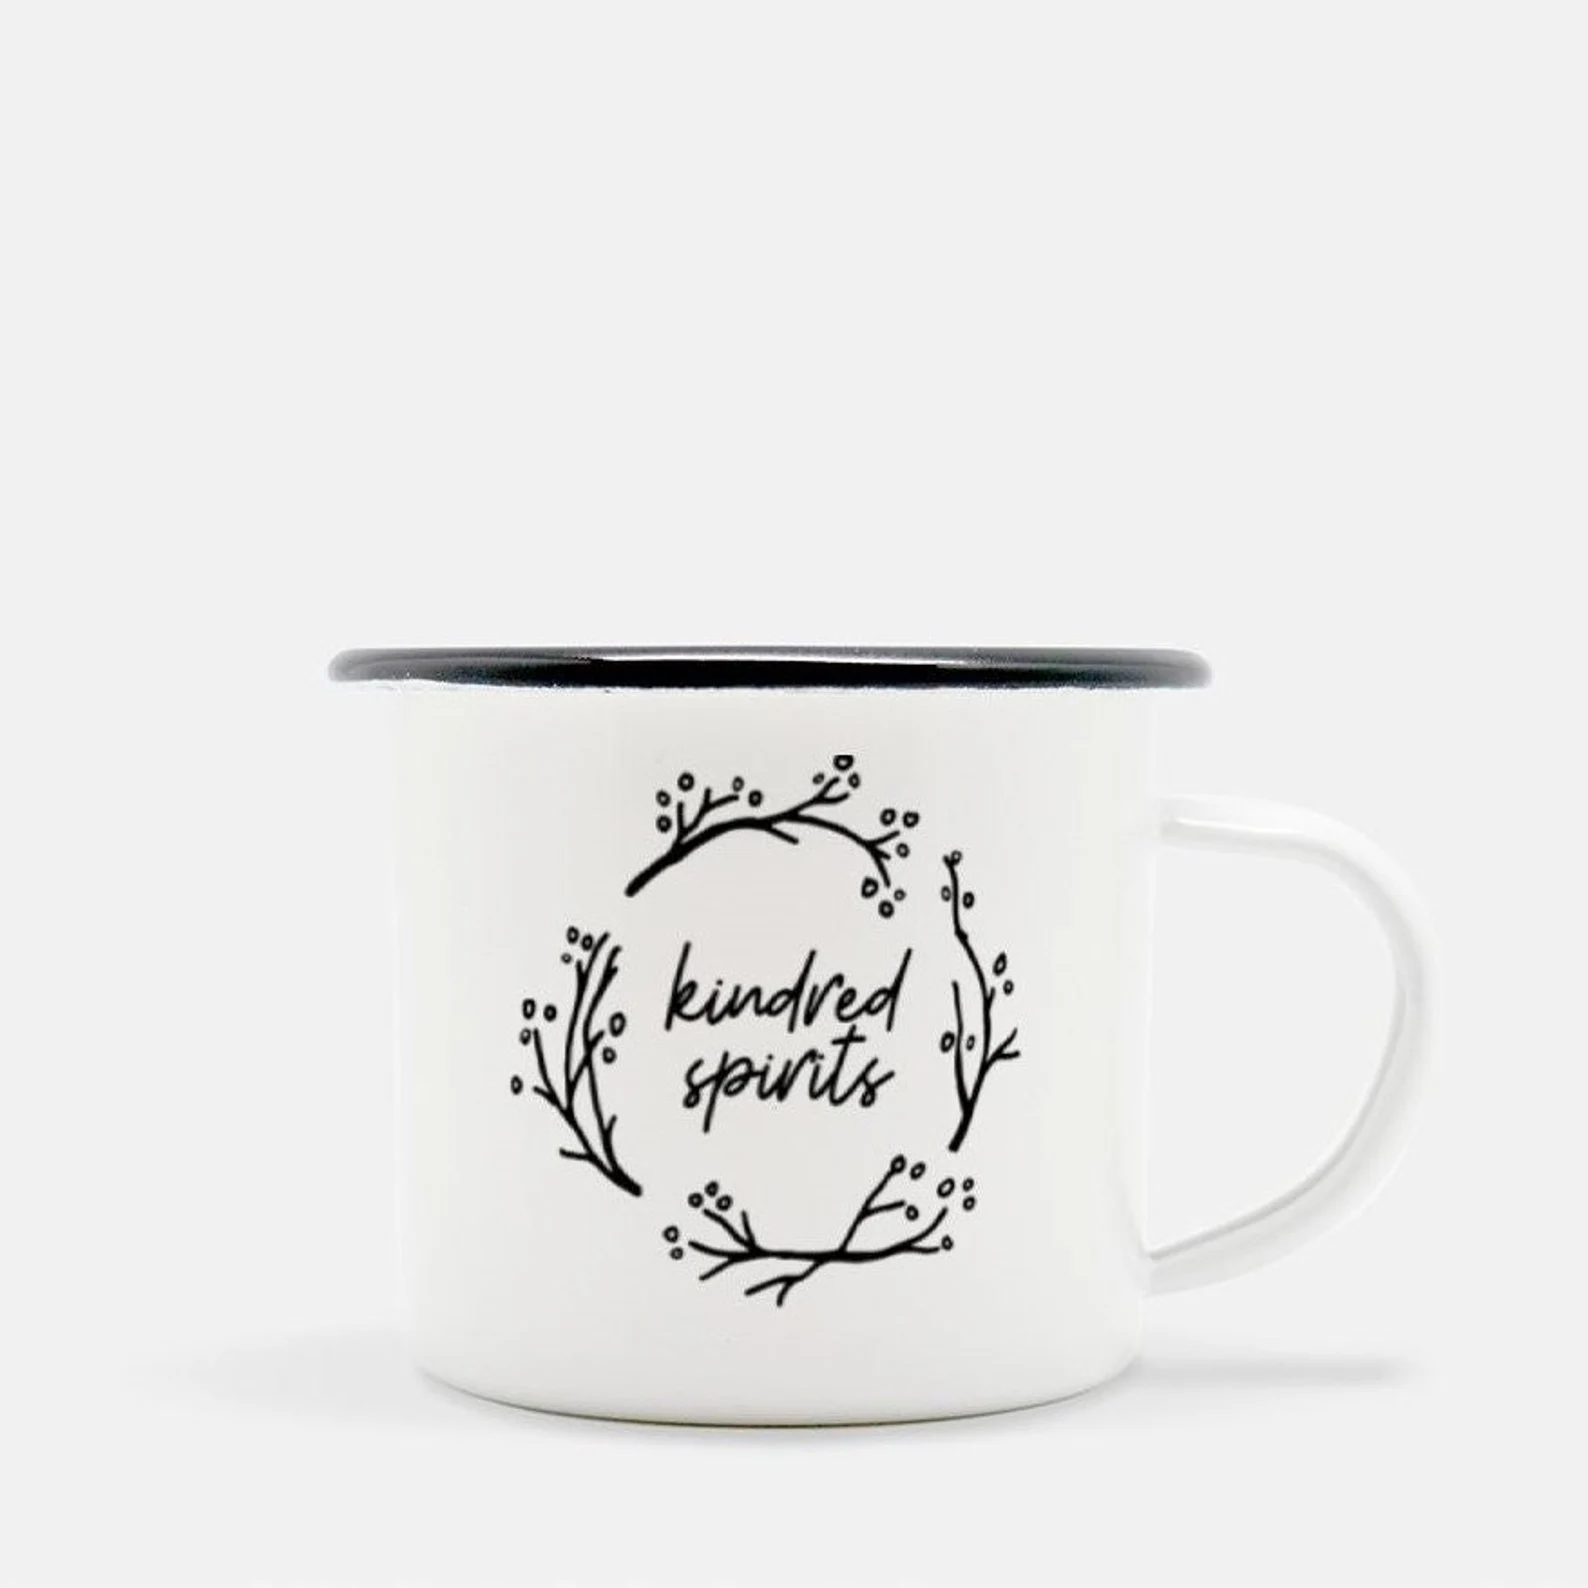 whit and black camp mug that reads "kindred spirits" circles in a black line illustration of branches and berries